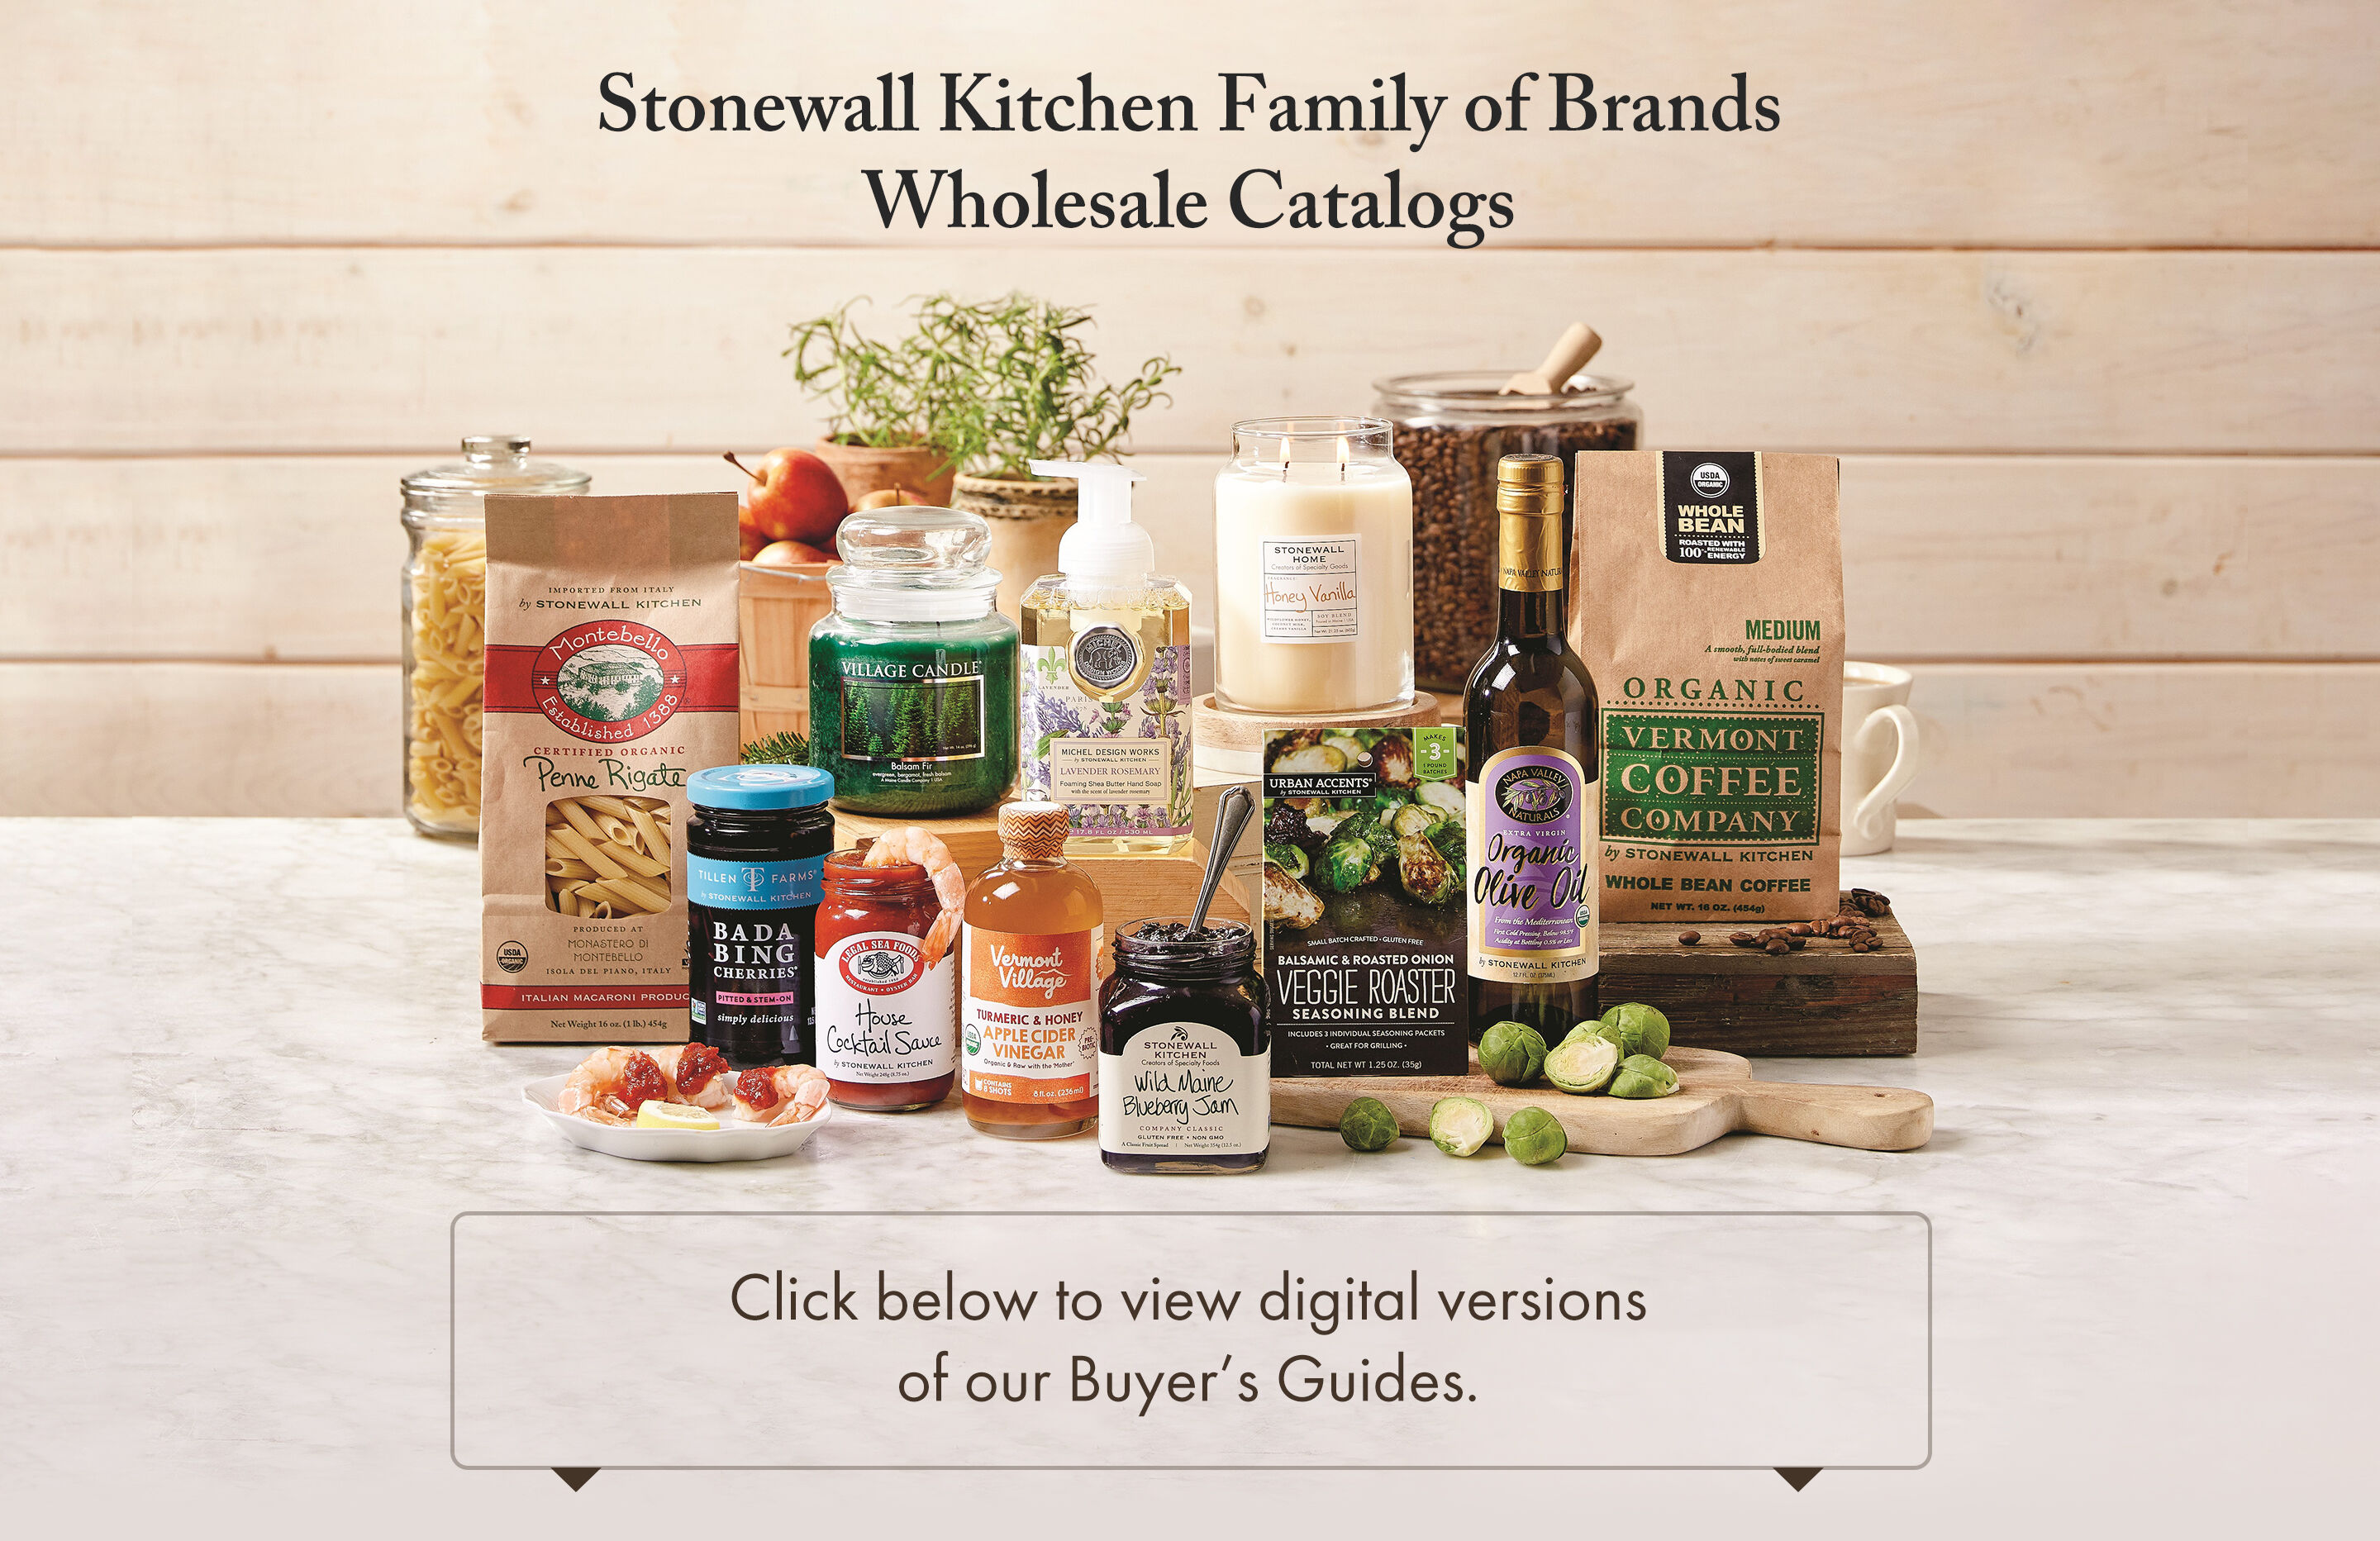 Stonewall Kitchen Family of Brands Wholesale Catalogs – Click below to view digital versionsof our Buyer’s Guide.